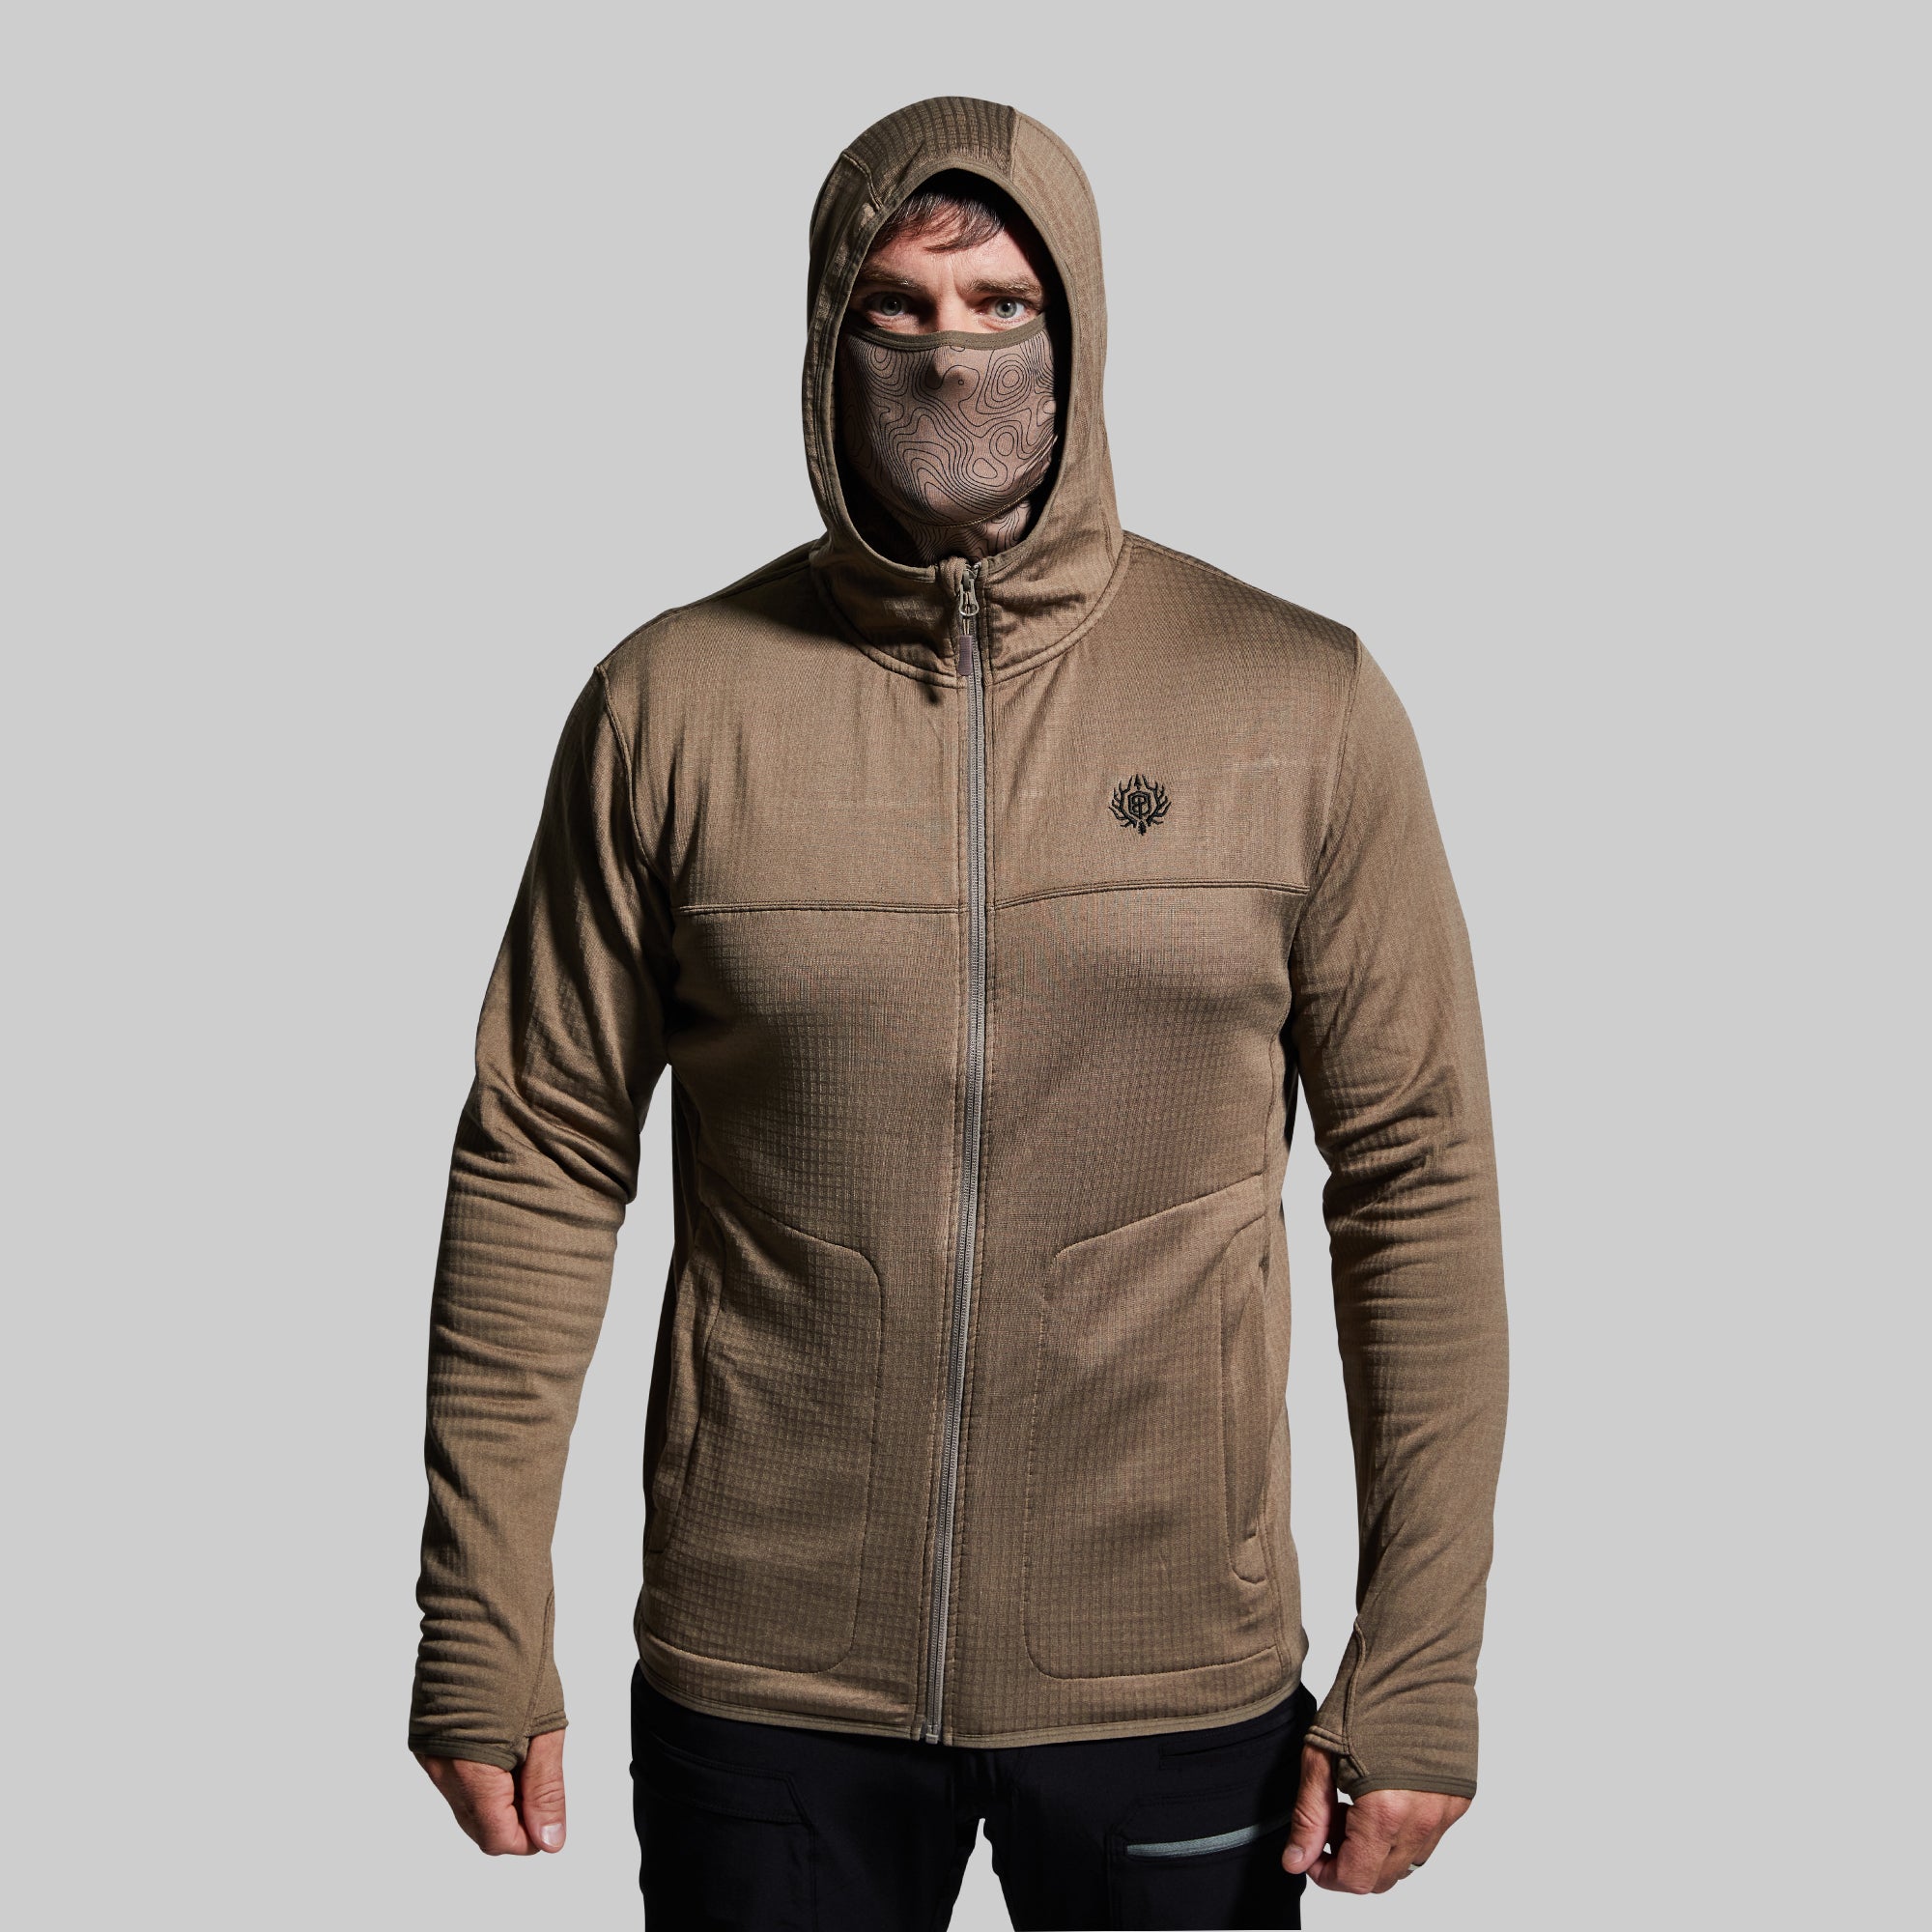 Technical Outerwear, Camping Gear & Outdoor Clothing